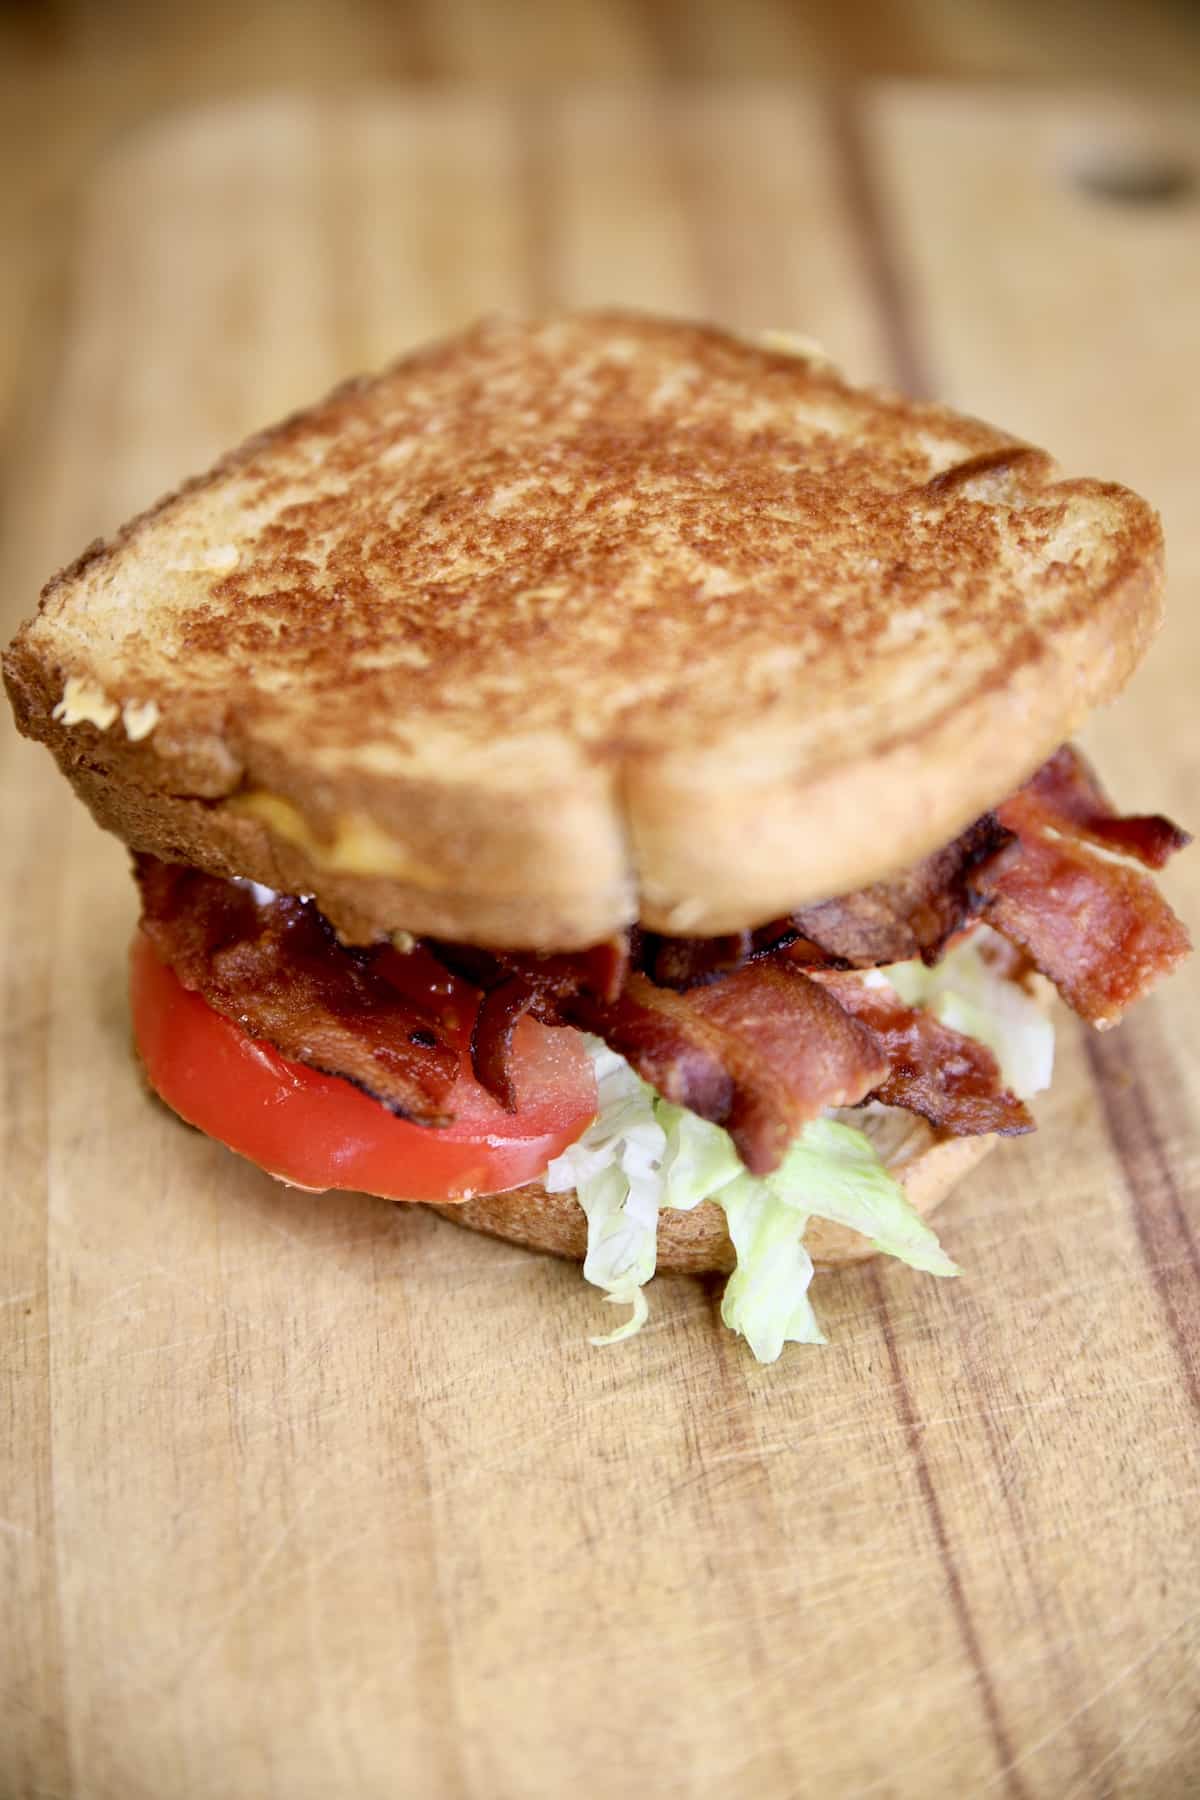 Grilled cheese stacked on a BLT.